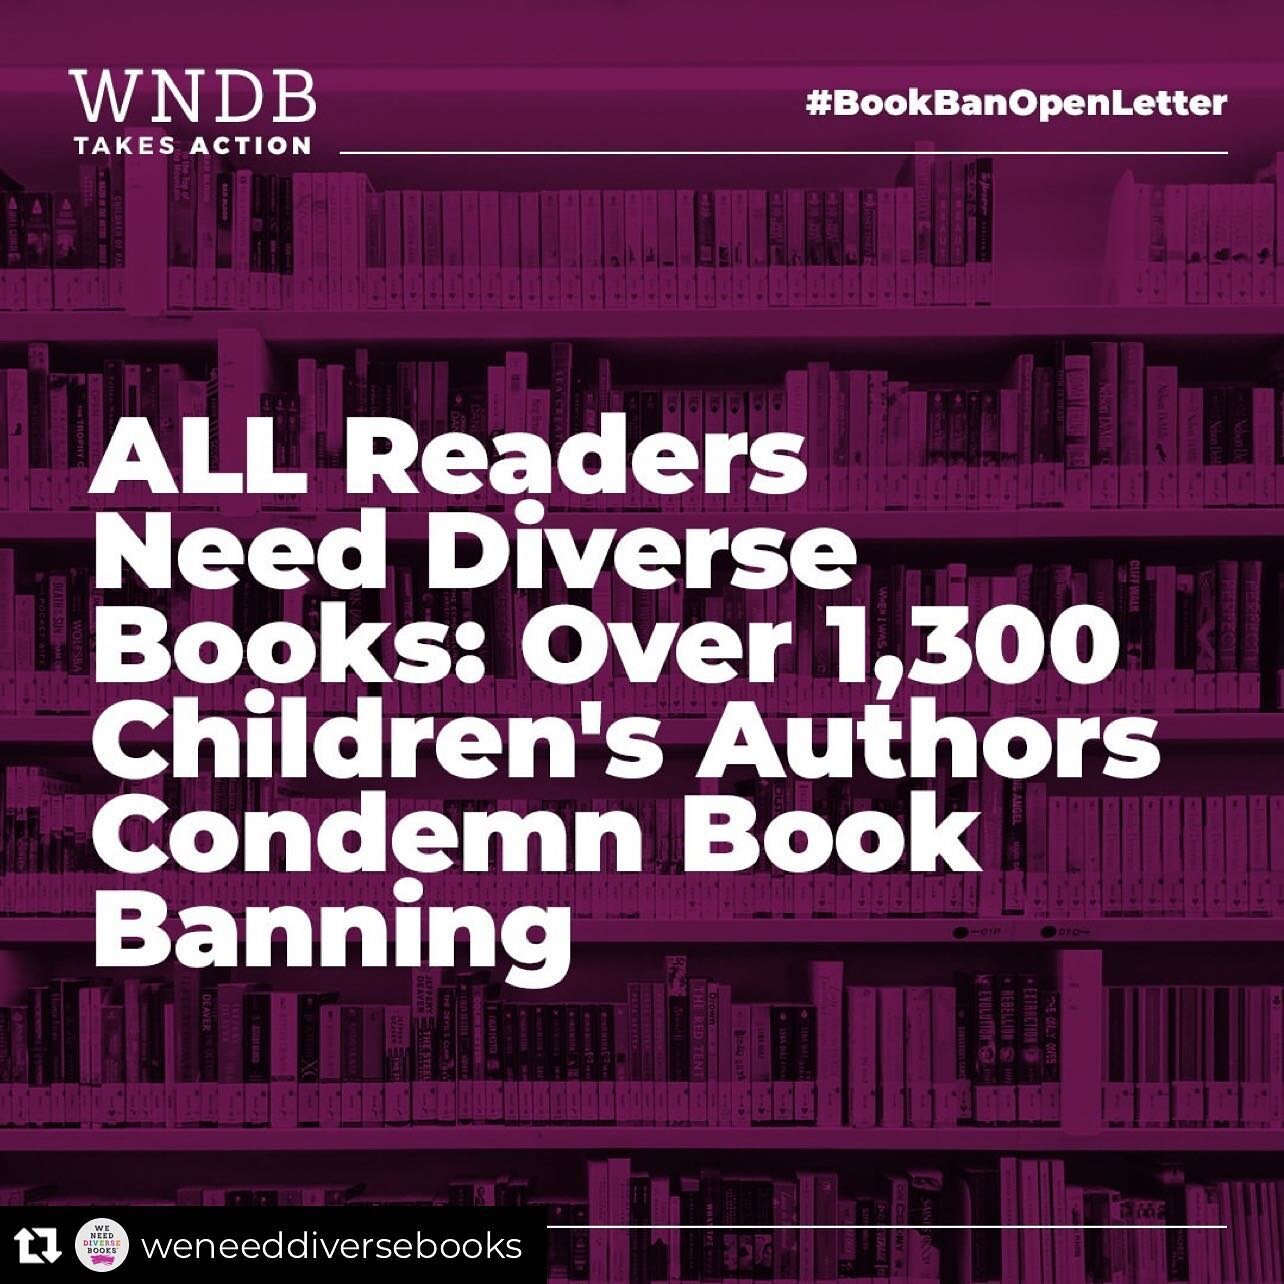 Repost from @weneeddiversebooks
&bull;
Ahead of a congressional hearing on book bans and censorship, we and @csoontornvat sent an open letter with the signatures of over 1,300 authors to @oversightdems&mdash;but this call to action goes to state legi